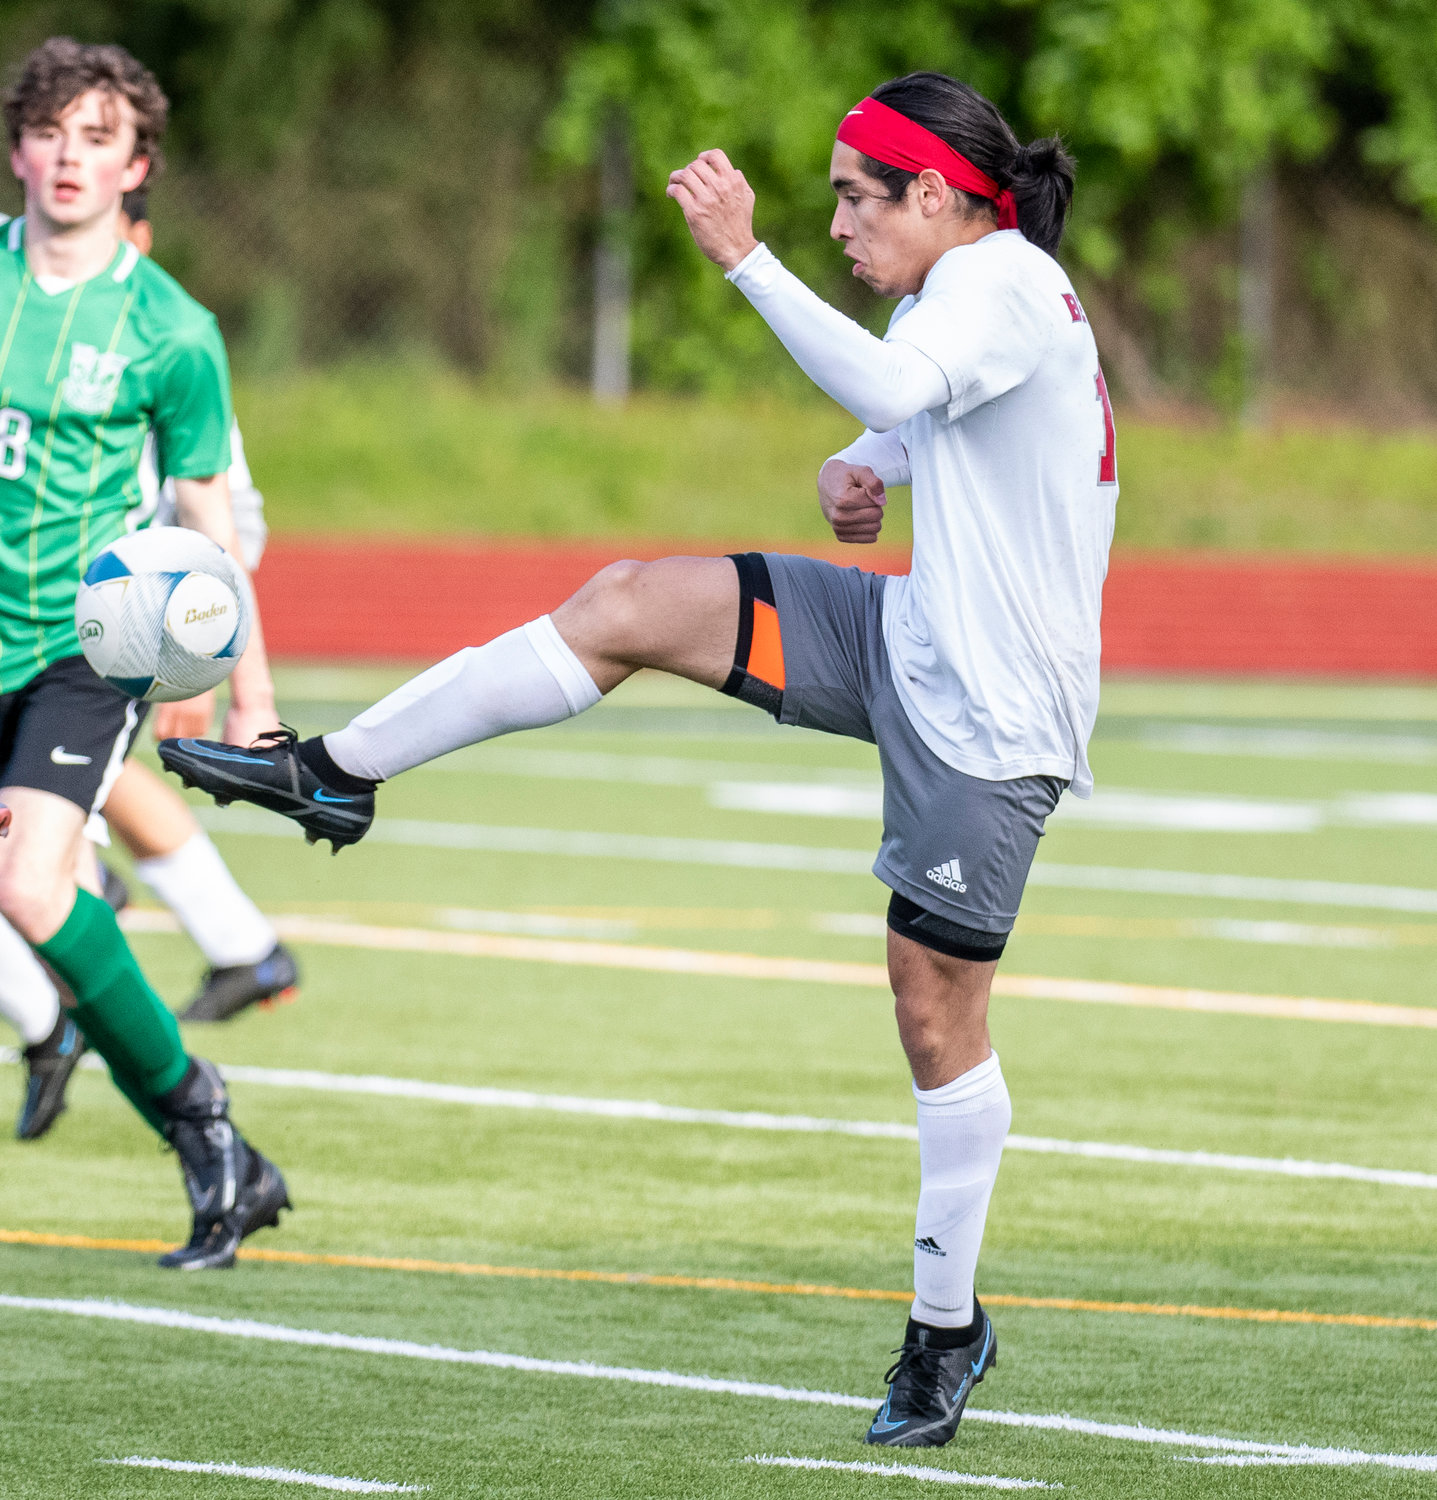 W.F. West's Isaac Madrigal clears a ball during the district semifinals against Tumwater on May 12.